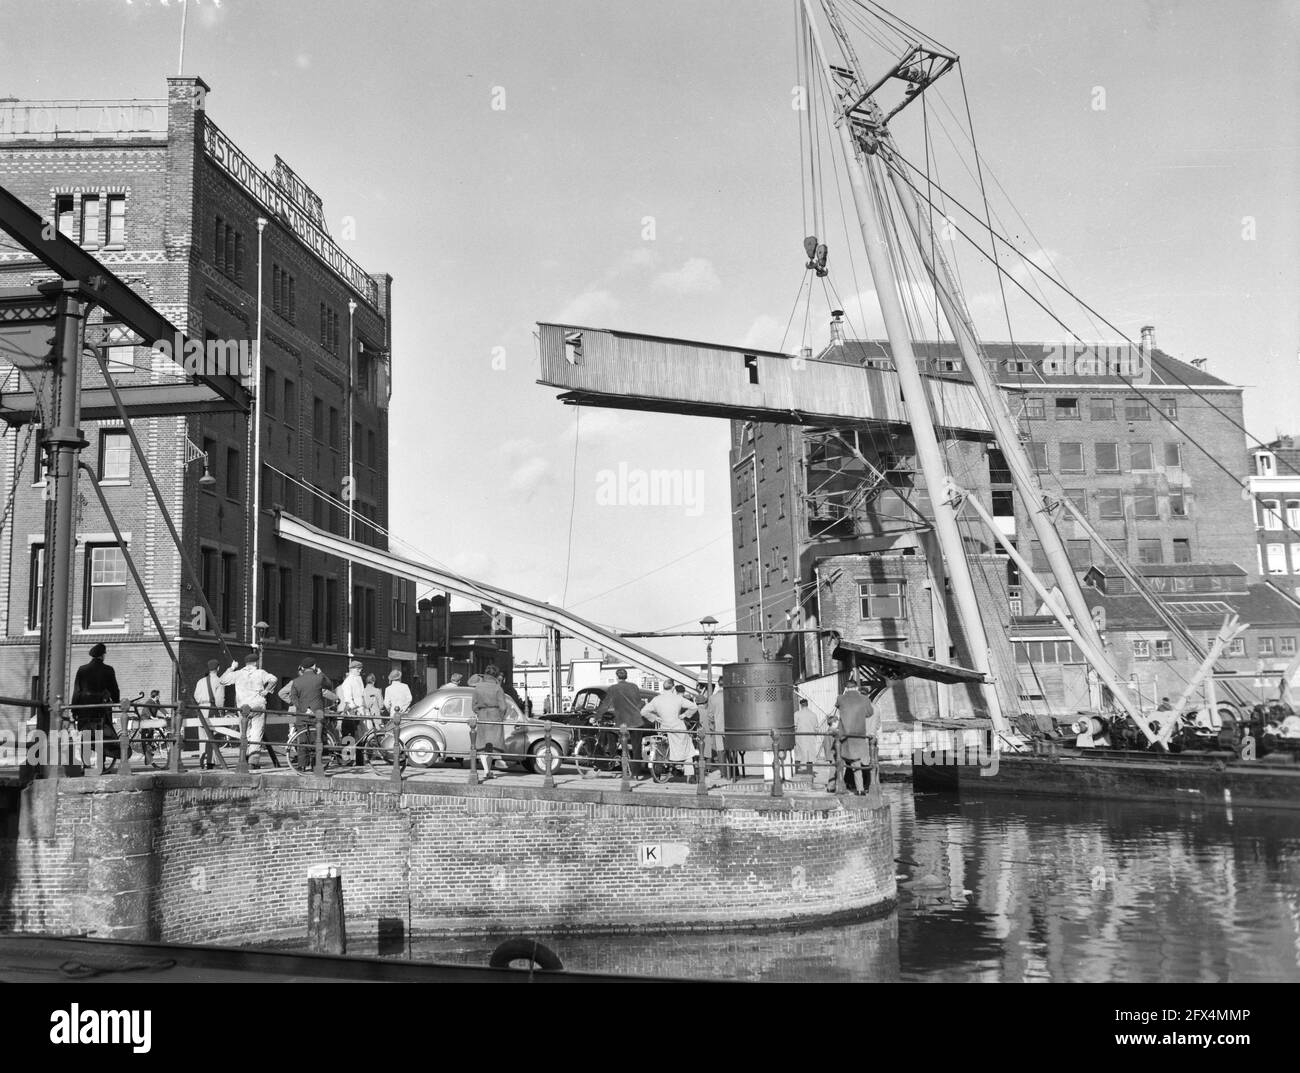 Demolition of connecting bridge of the Meelfabriek Holland the floating barge Reebok takes the bridge in the hoists, November 10, 1959, SLOPEN, hoists, connecting bridges, The Netherlands, 20th century press agency photo, news to remember, documentary, historic photography 1945-1990, visual stories, human history of the Twentieth Century, capturing moments in time Stock Photo